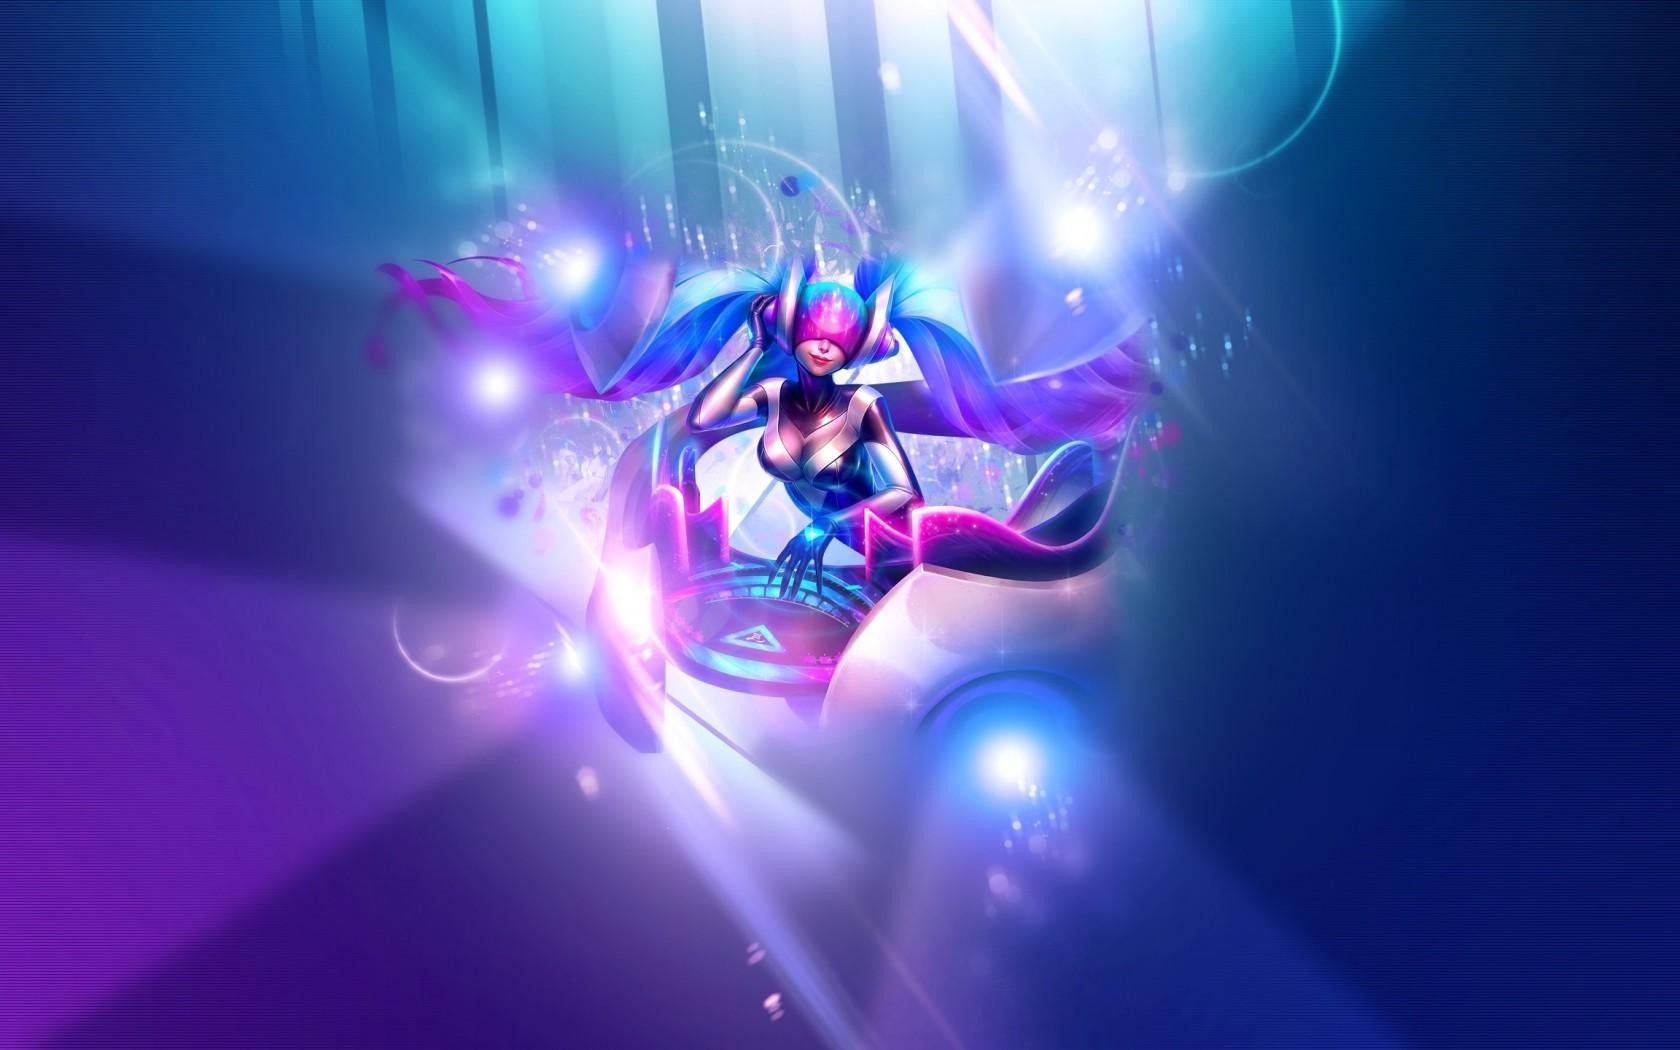 Download 1680x1050 Dj Sona, League Of Legends, Electro Music